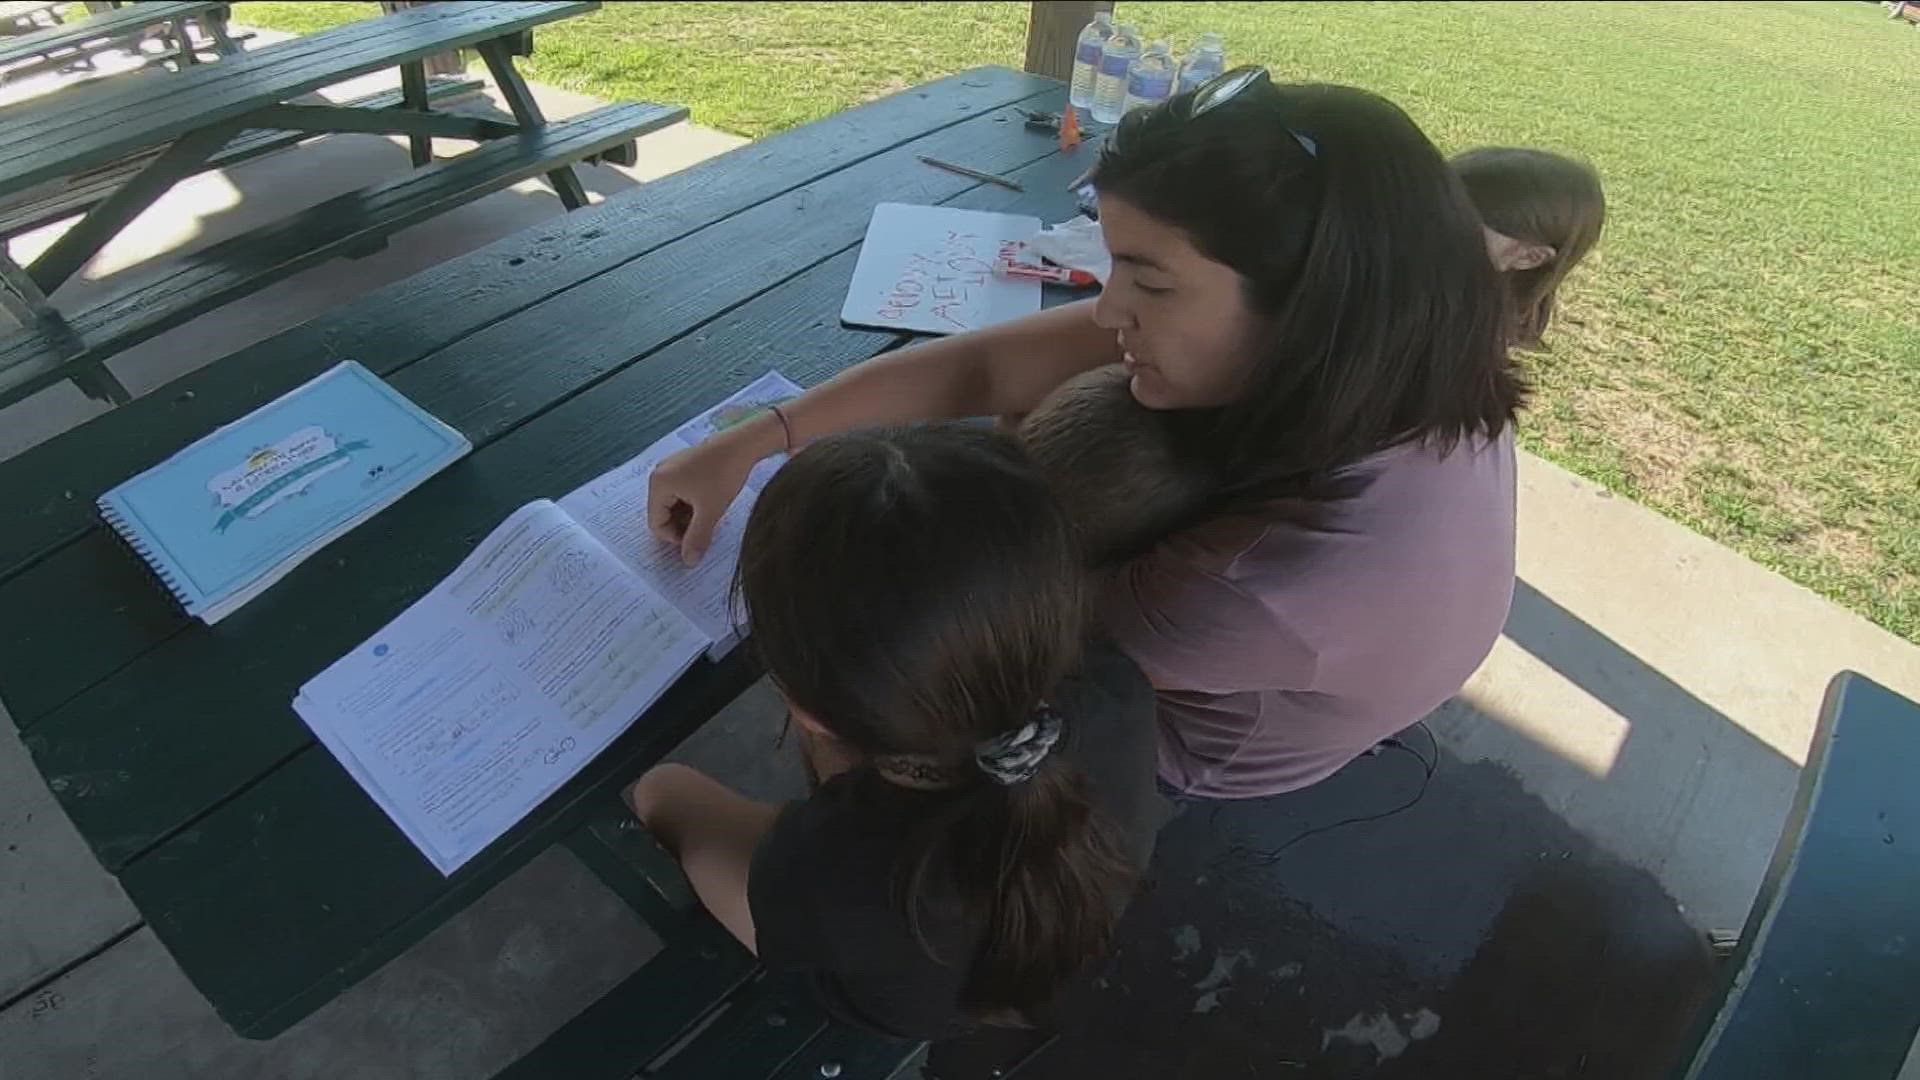 In the last year, the number of families in the homeschooling program increased by 12 percent.